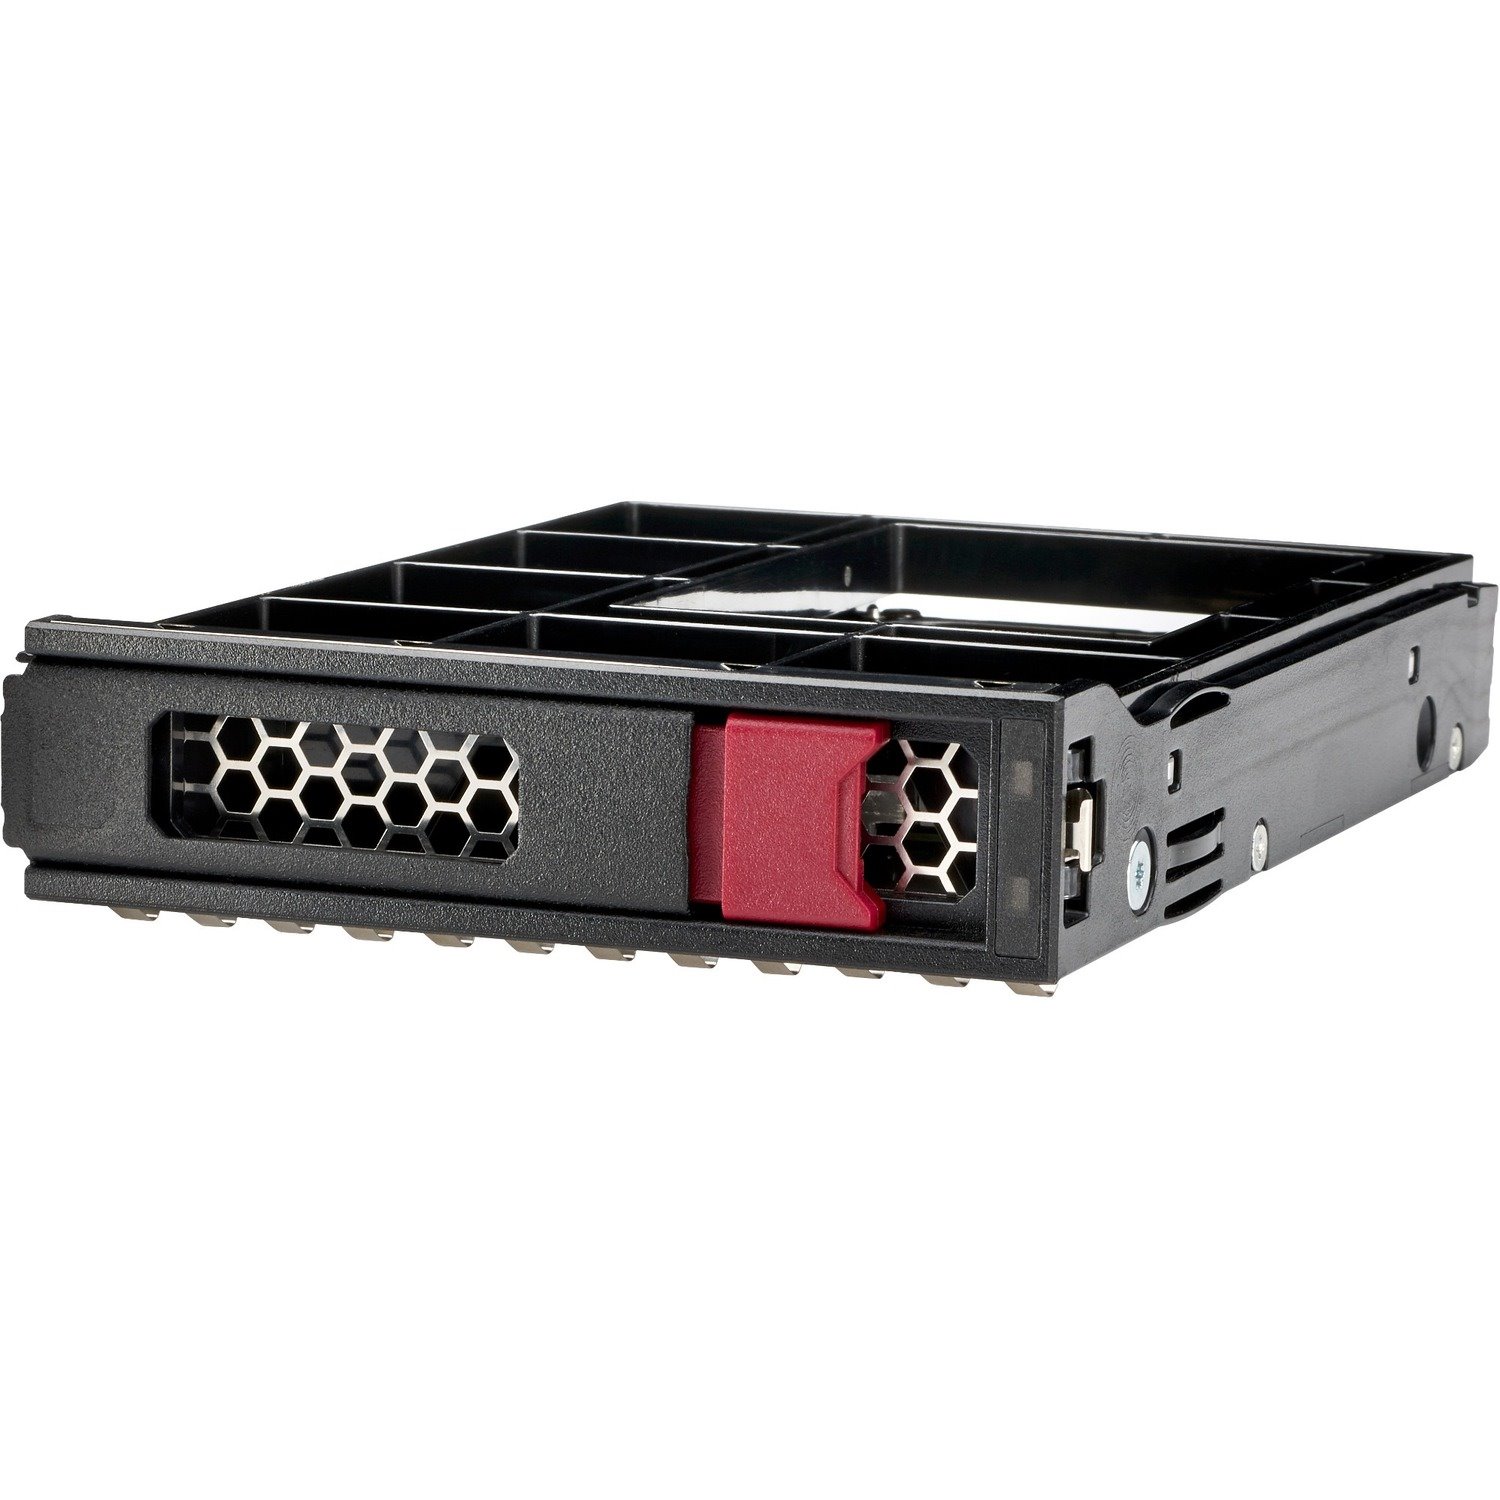 HPE Sourcing PM883 960 GB Solid State Drive - 3.5" Internal - SATA (SATA/600) - Read Intensive